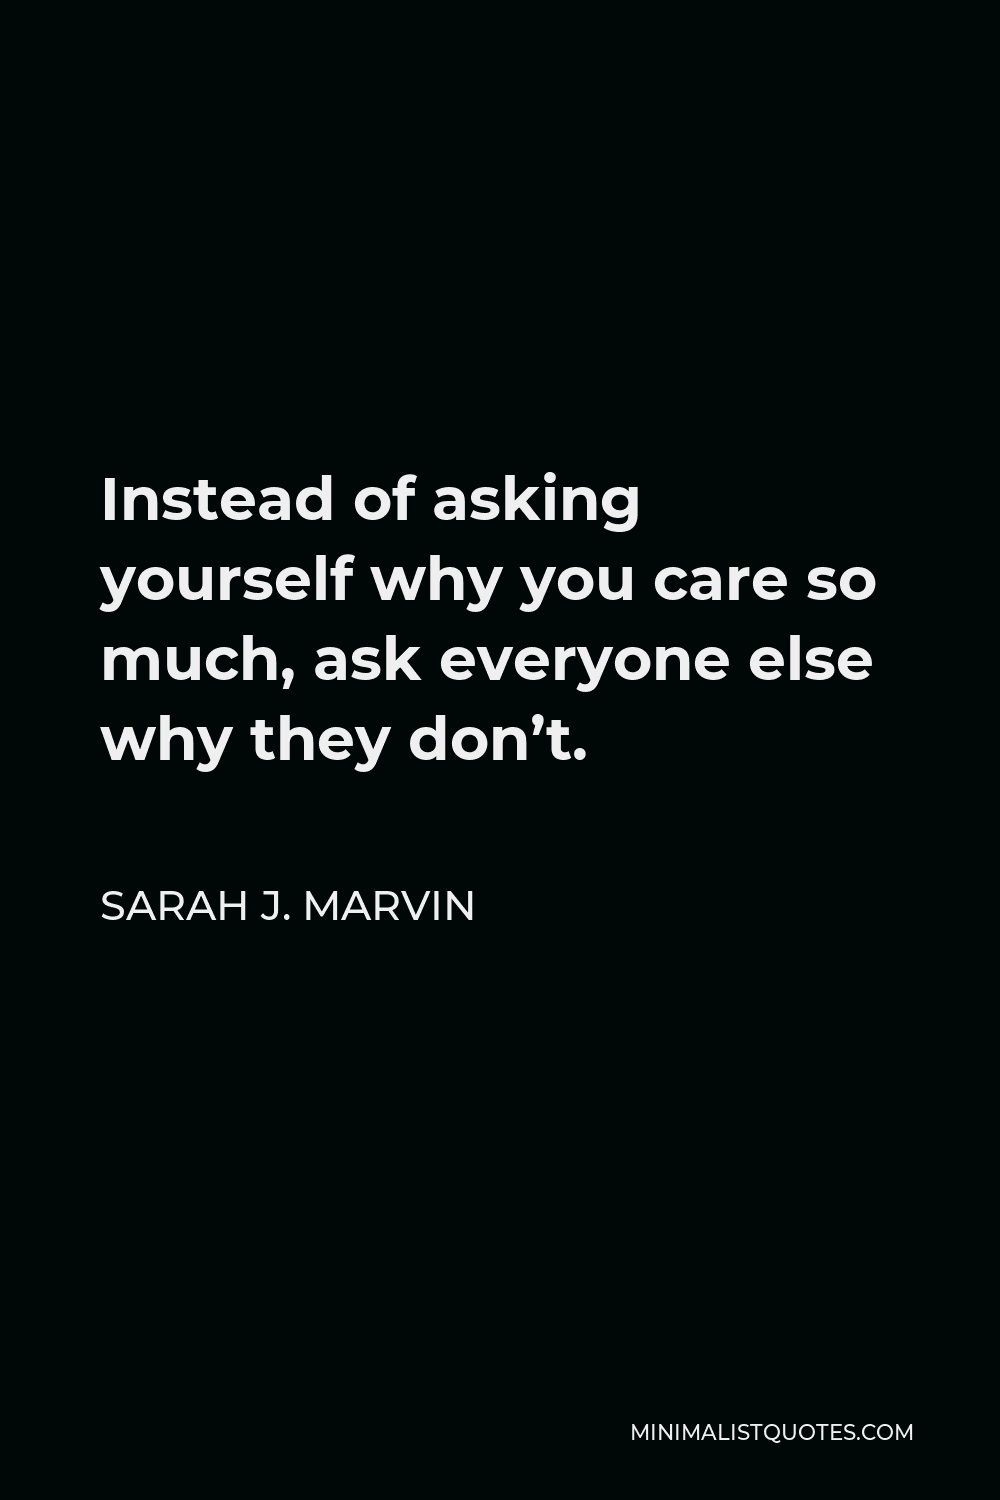 Sarah J. Marvin Quote - Instead of asking yourself why you care so much, ask everyone else why they don’t.